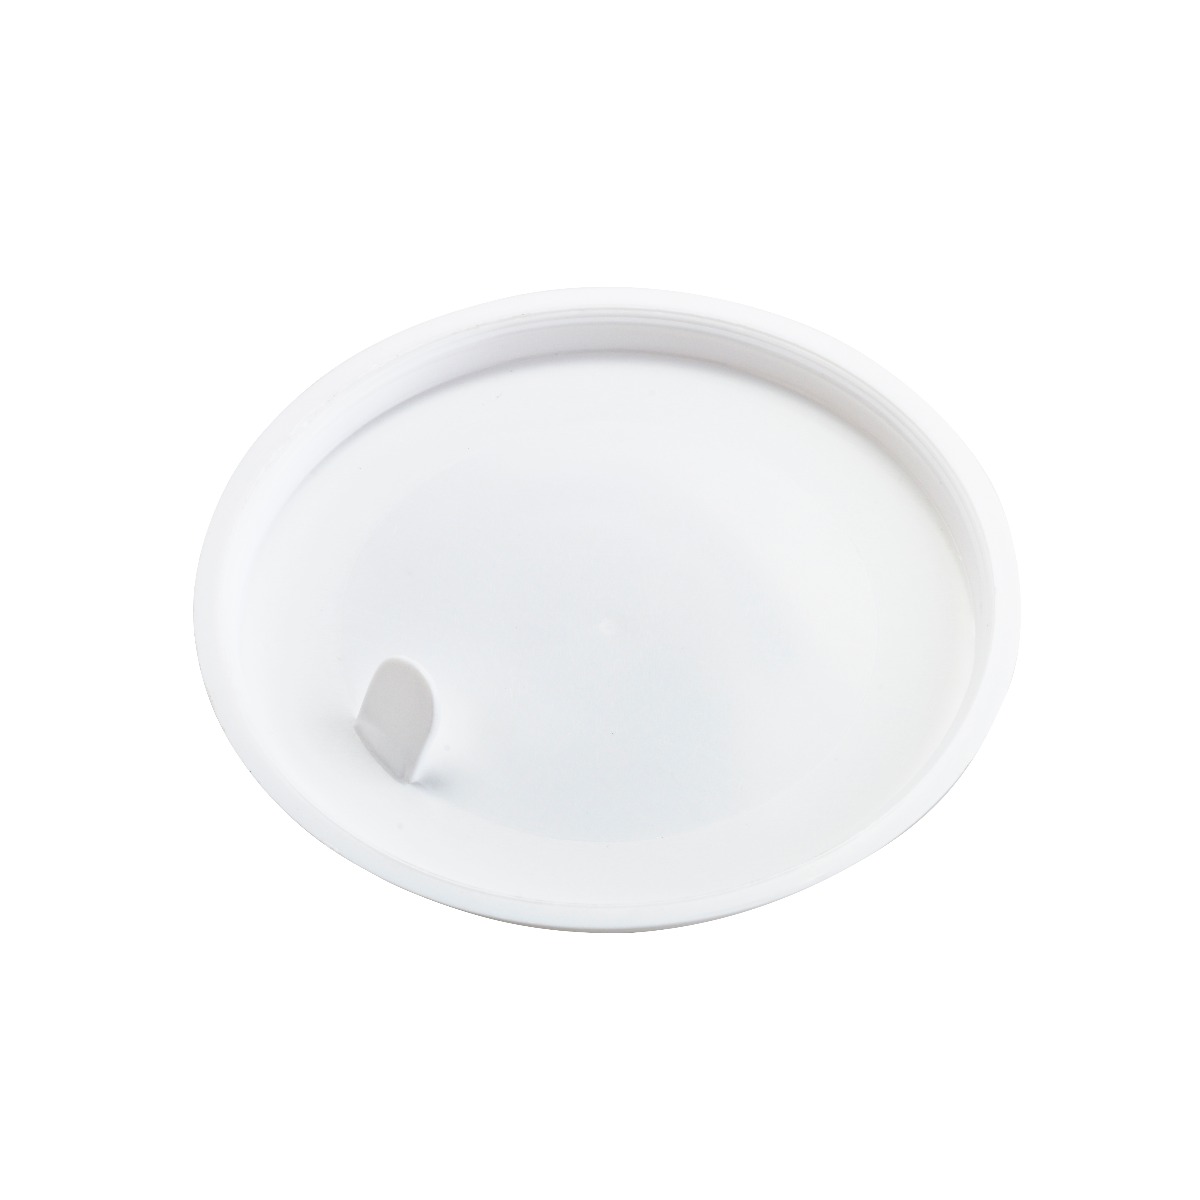 Peal Back Lid in White on white background